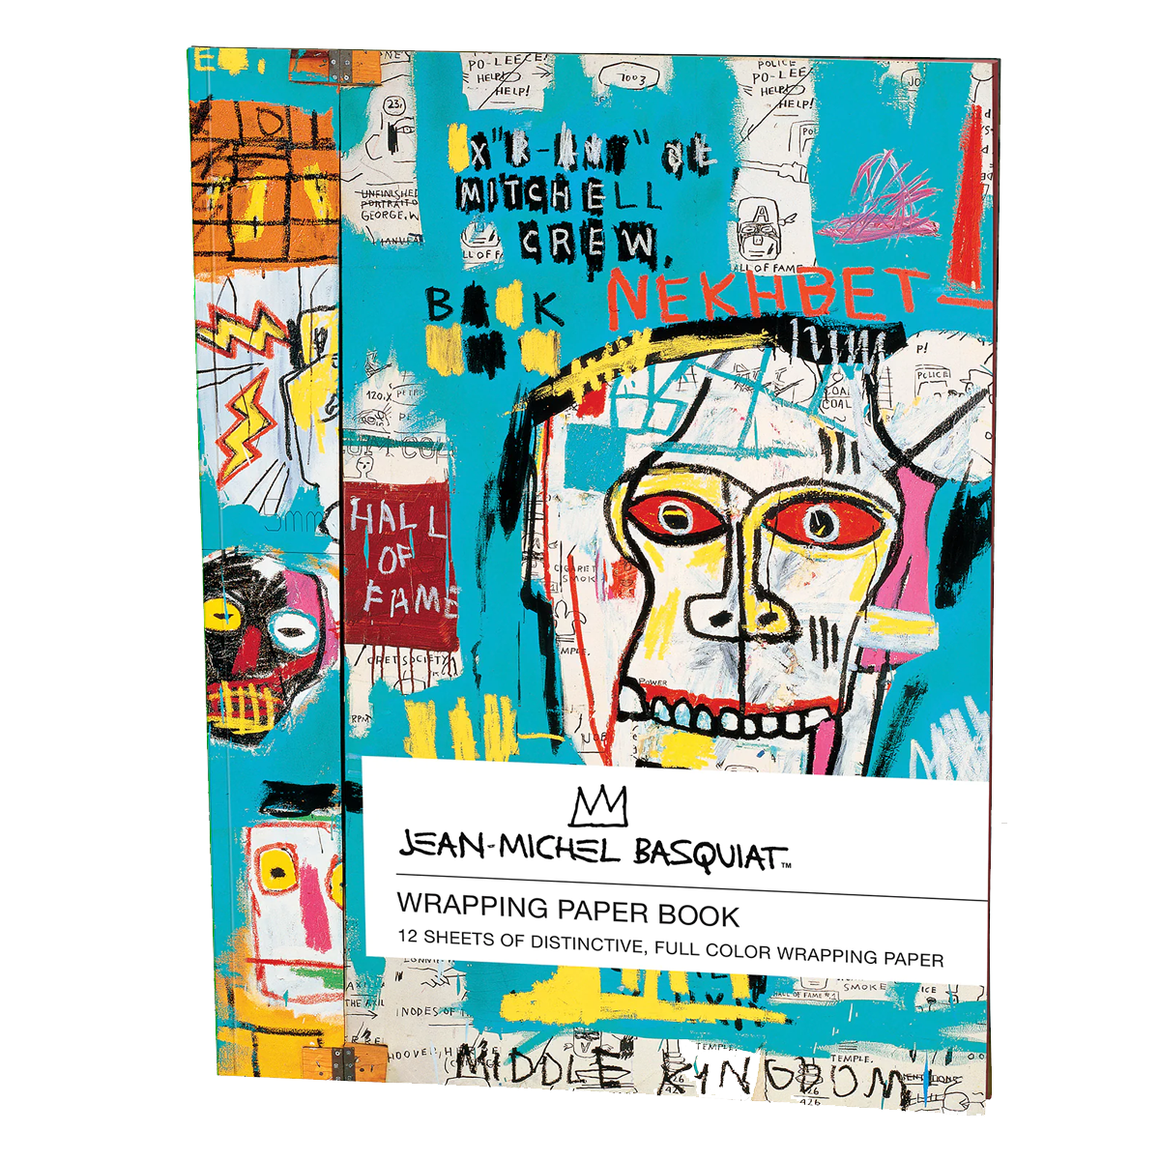 Wrapping Paper Book | Jean-Michel Basquiat